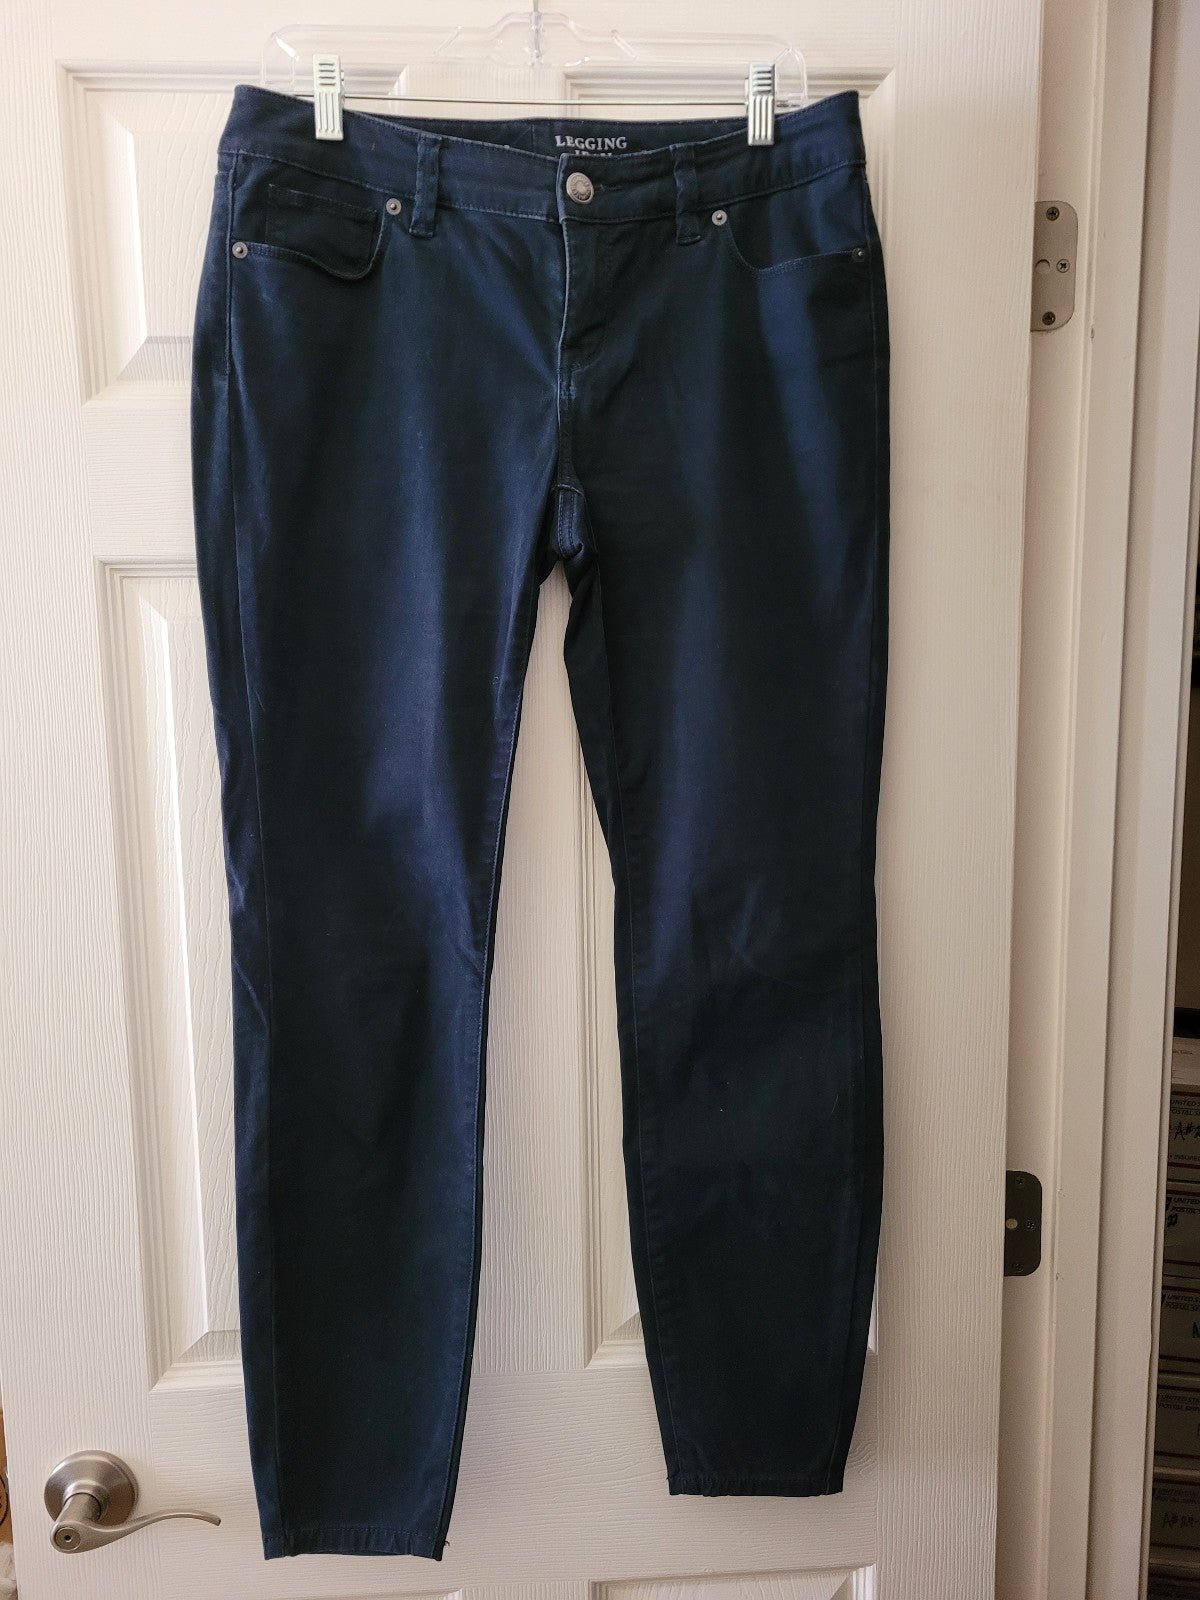 Wholesale price The Limited Legging Jeans! LIKE NEW! Si